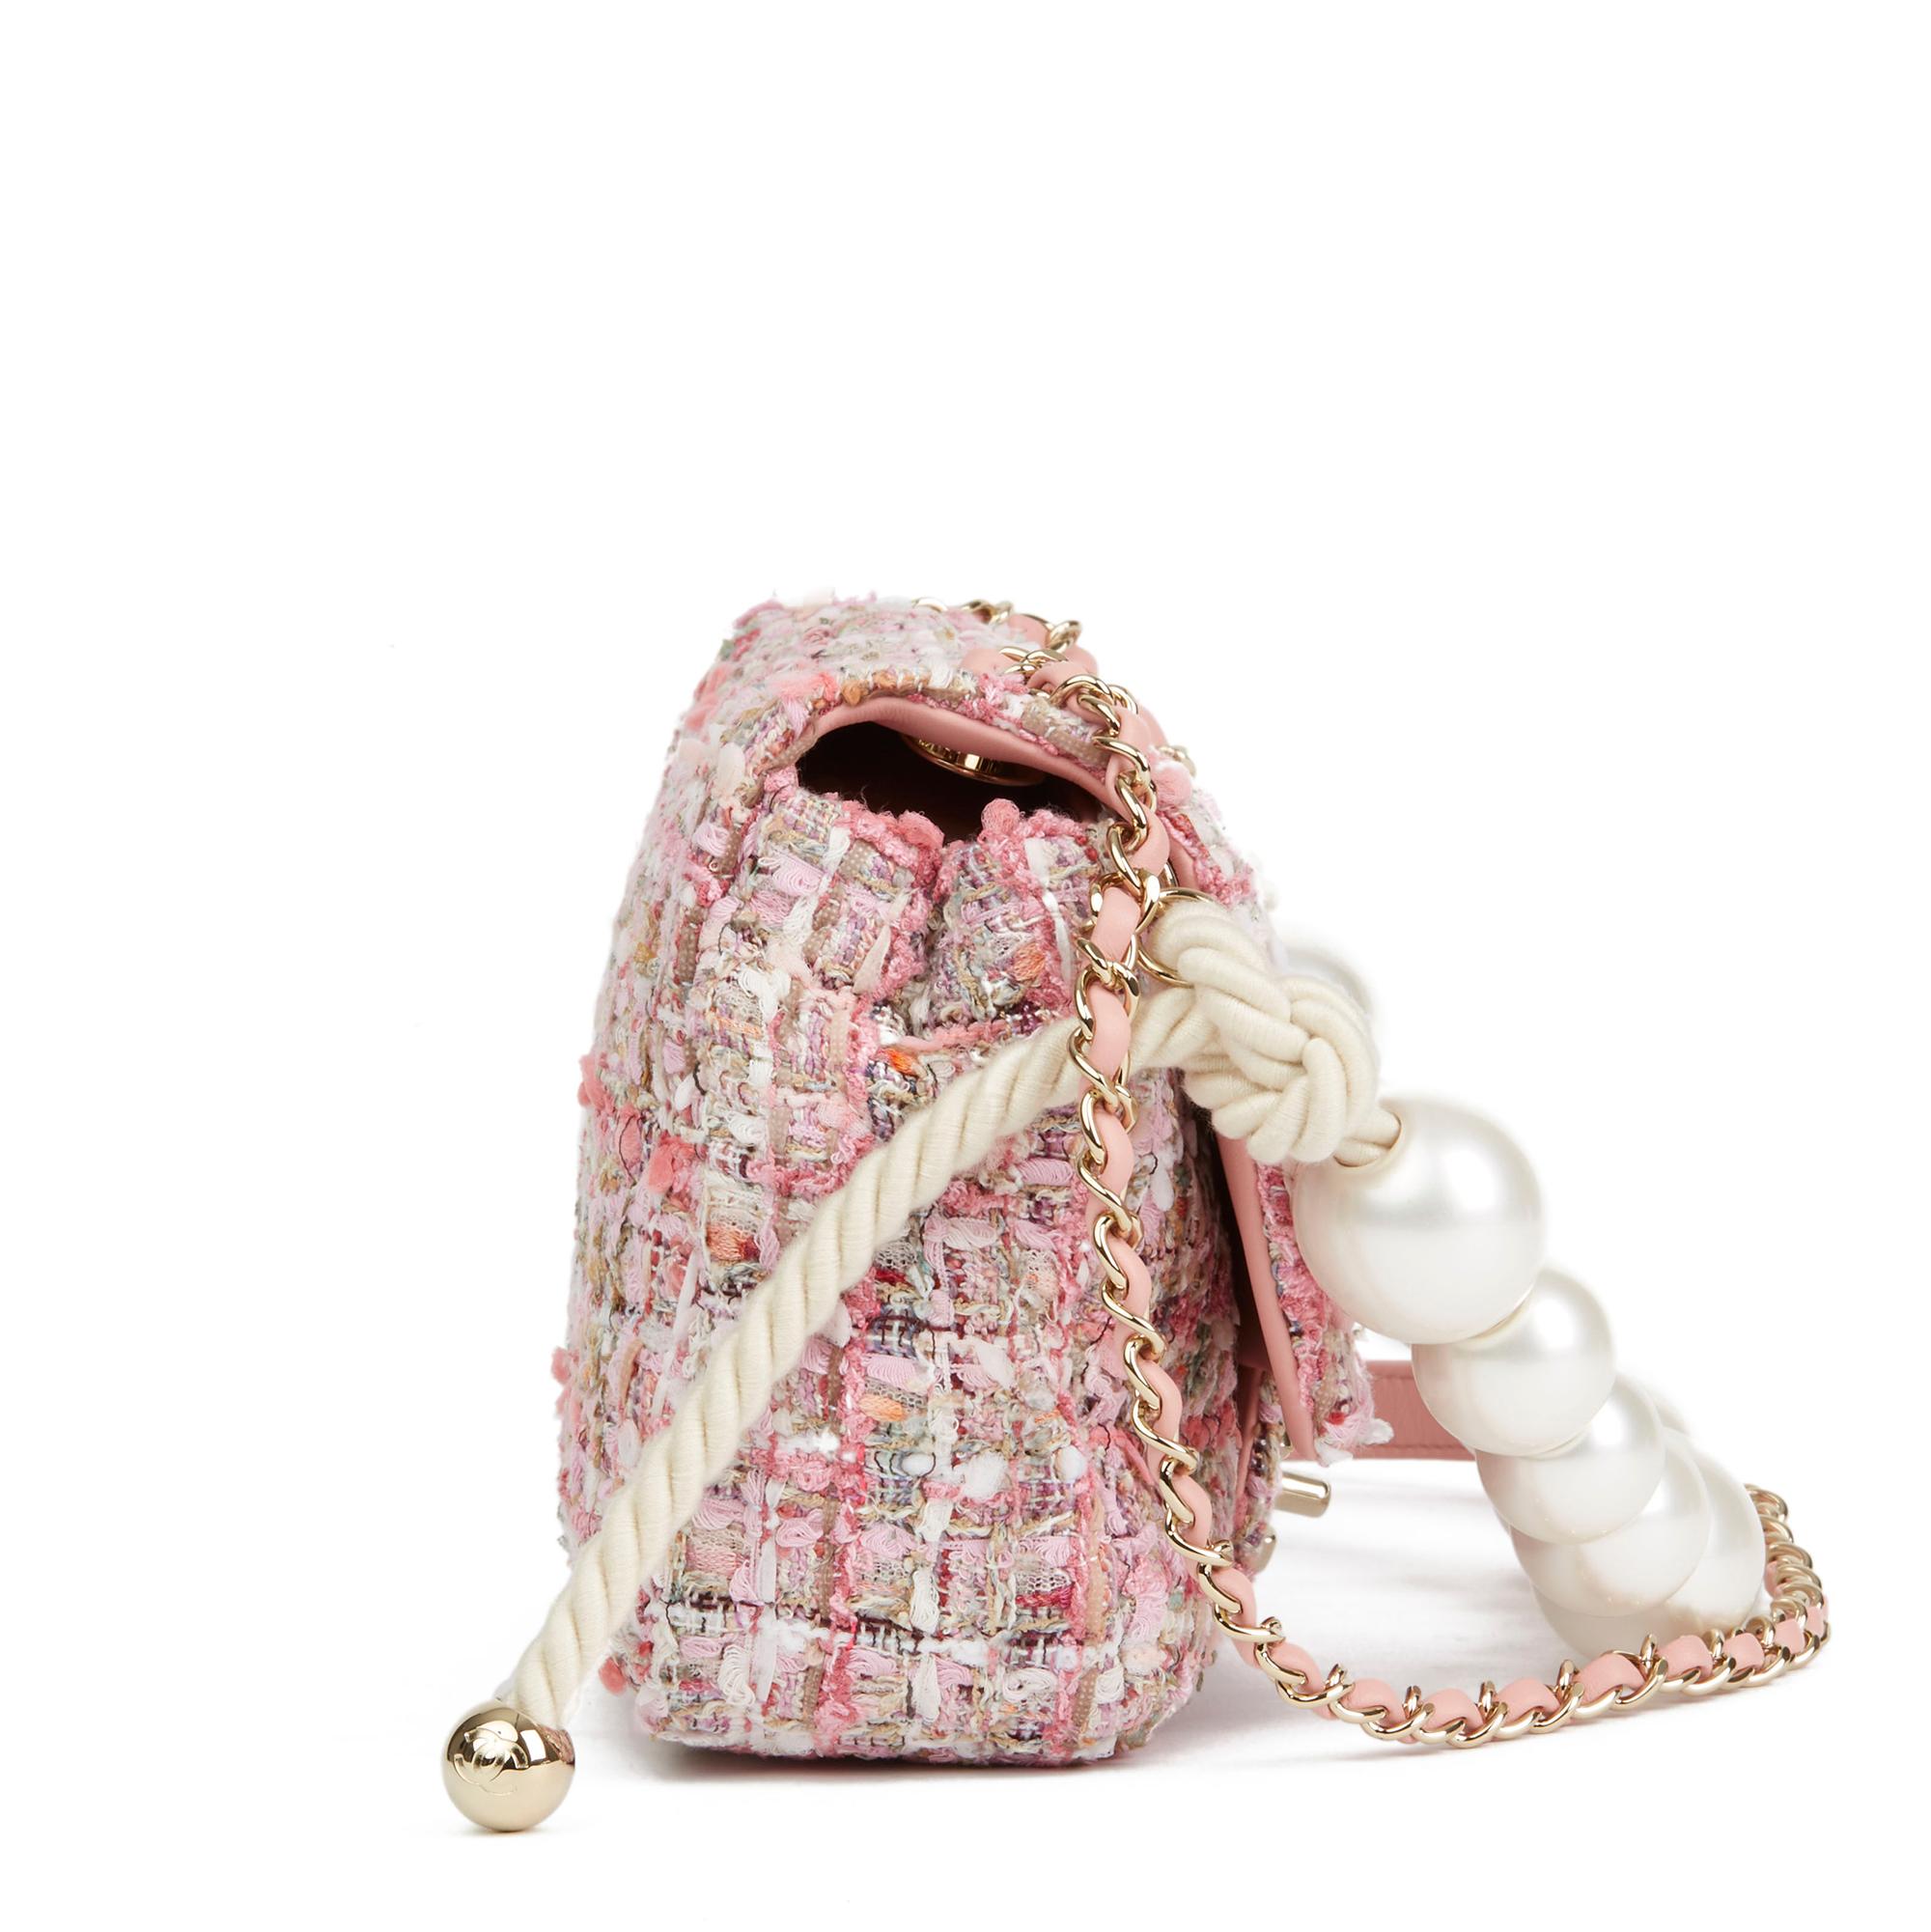 CHANEL
Pink Tweed Fabric & Pearls Classic Single Flap Bag

Xupes Reference: HB2759
Serial Number: 27958864
Age (Circa): 2019
Accompanied By: Chanel Dust Bag, Box, Authenticity Card, Care Booklet, Harrods Receipt, Protective Felt
Authenticity